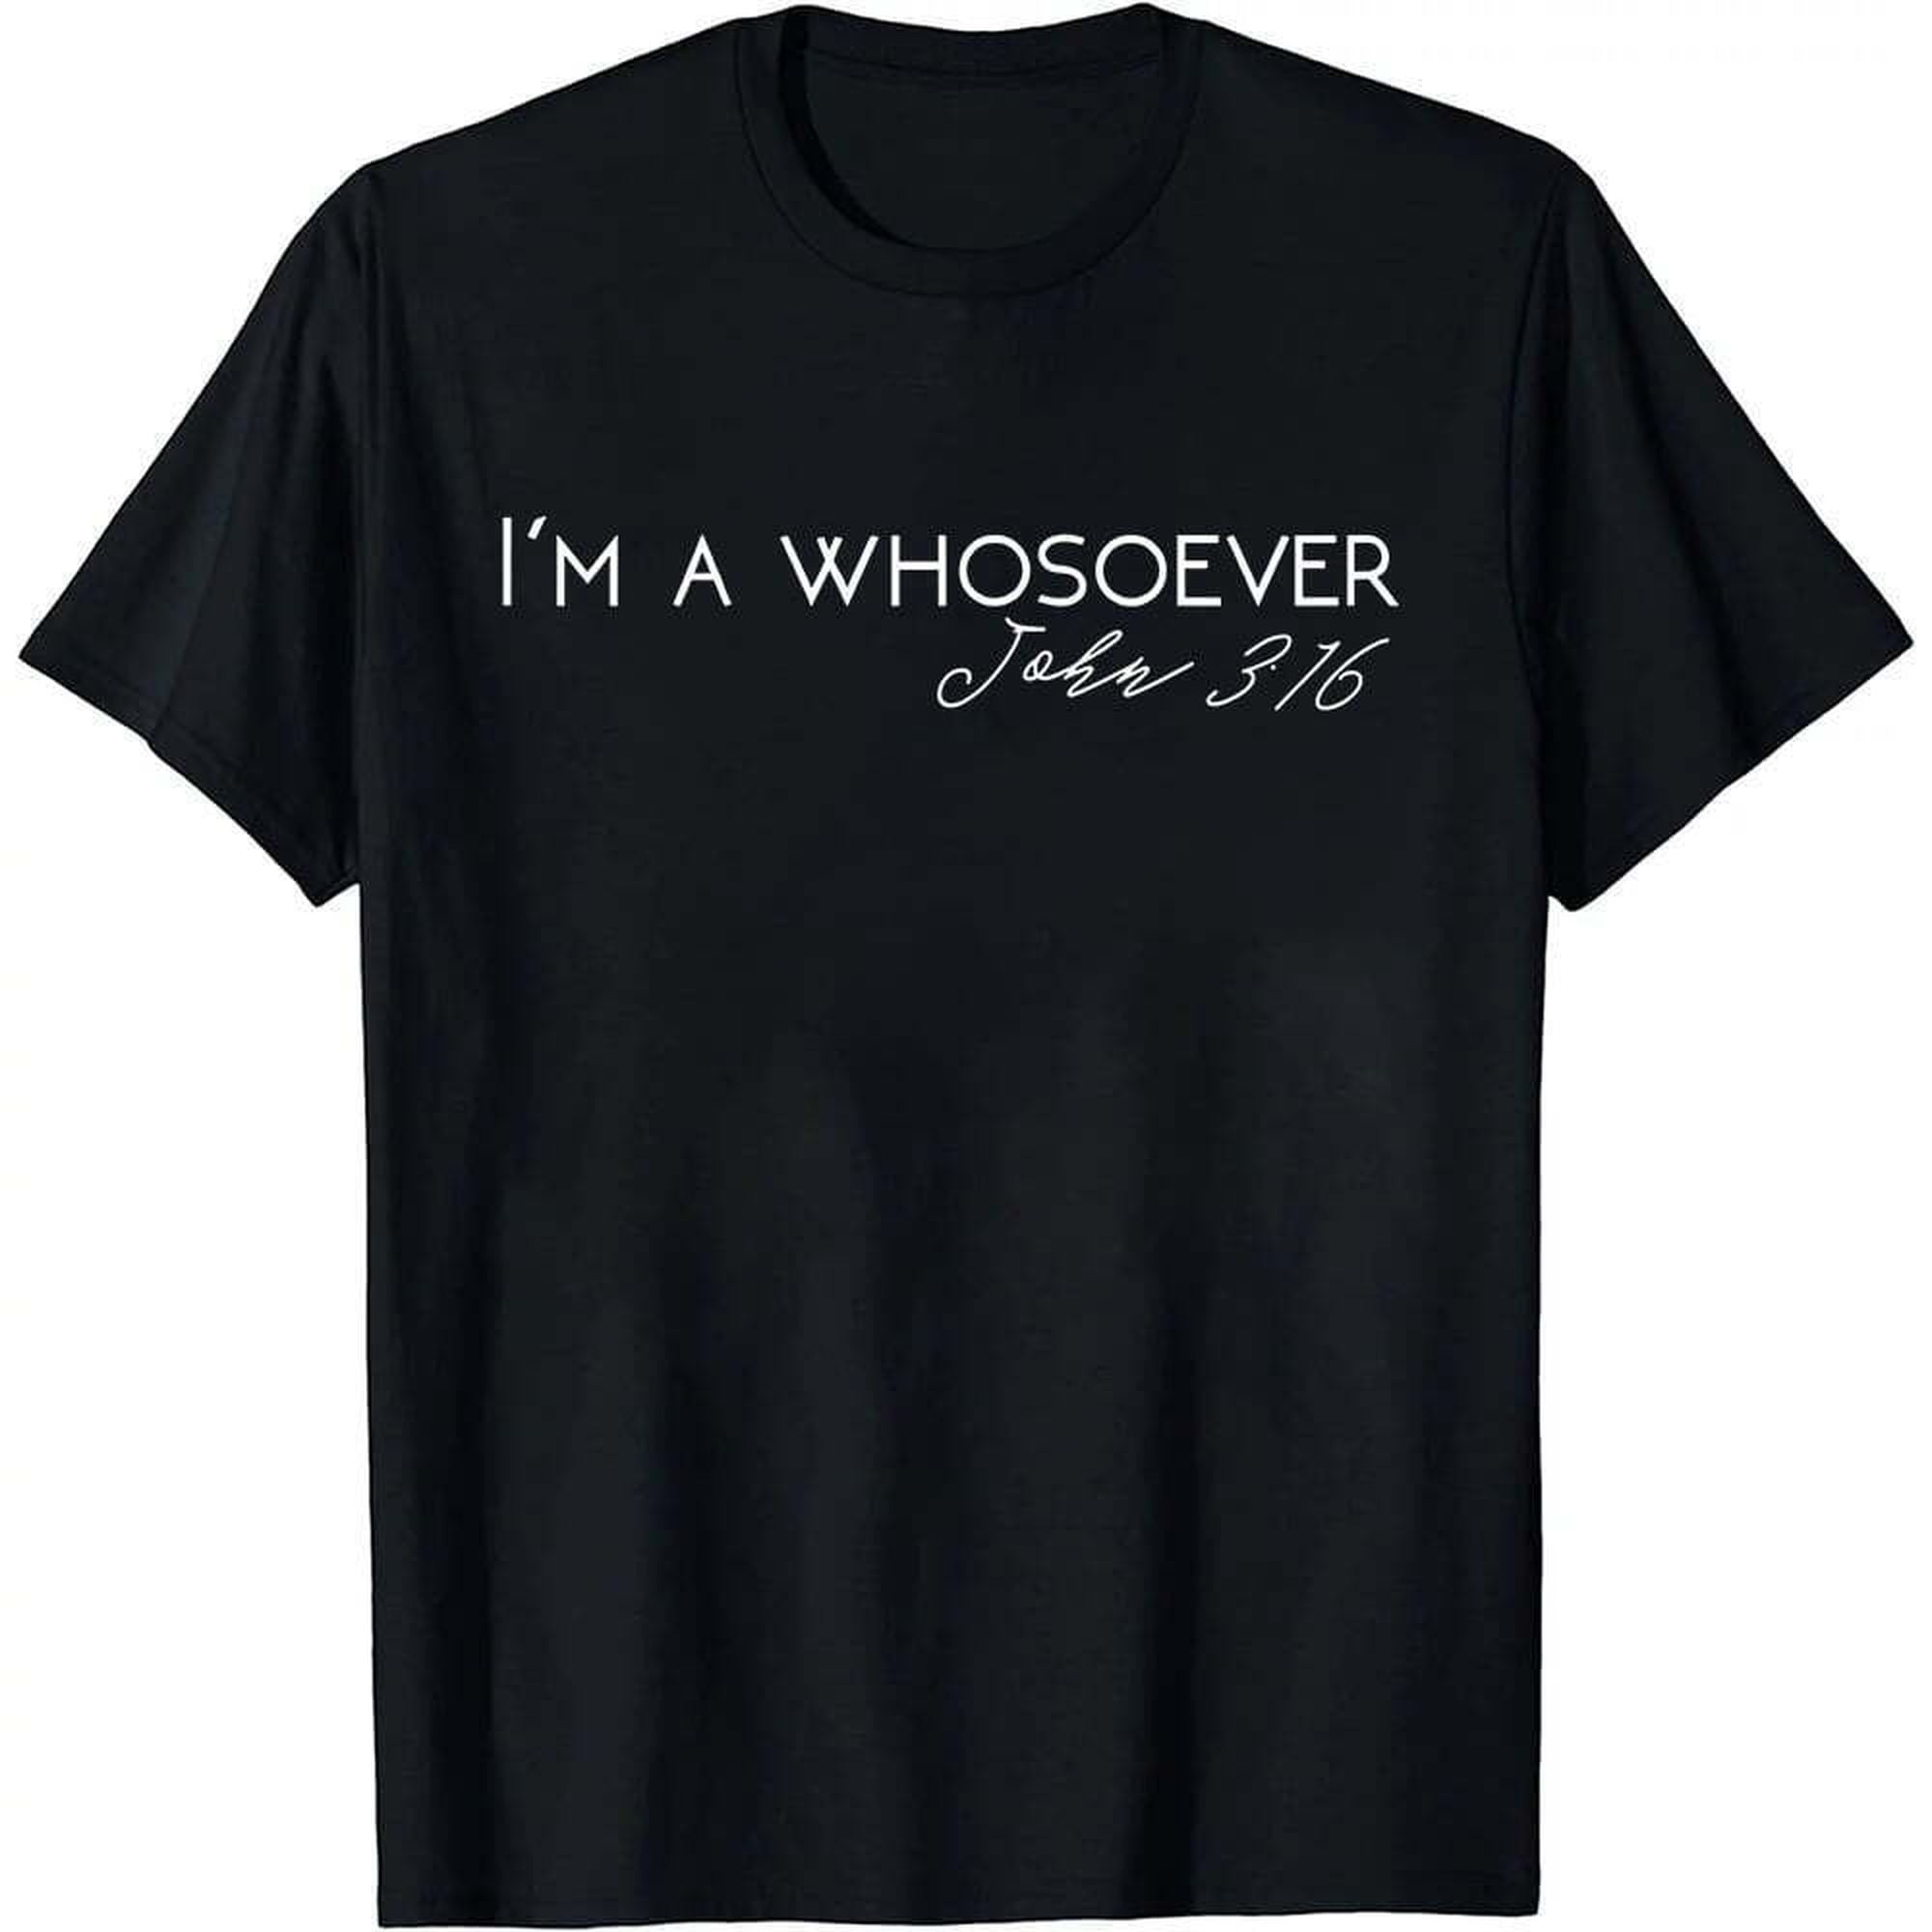 Saved by Grace: A Modern Christian T-Shirt for Whosoever Believers ...